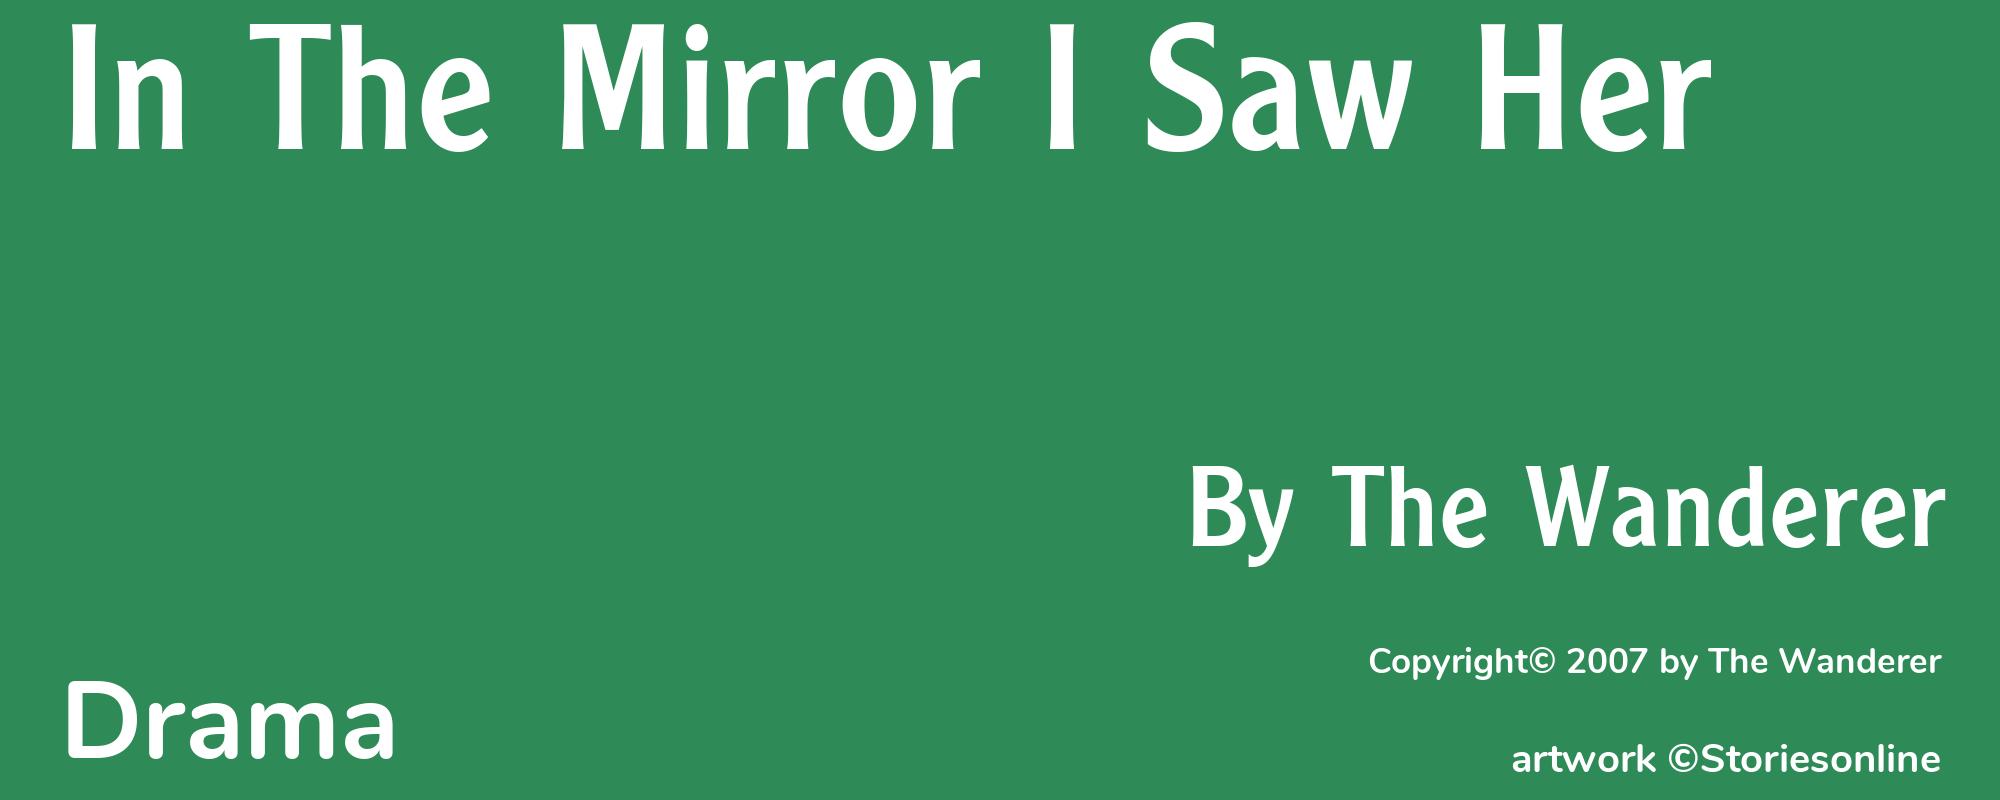 In The Mirror I Saw Her - Cover